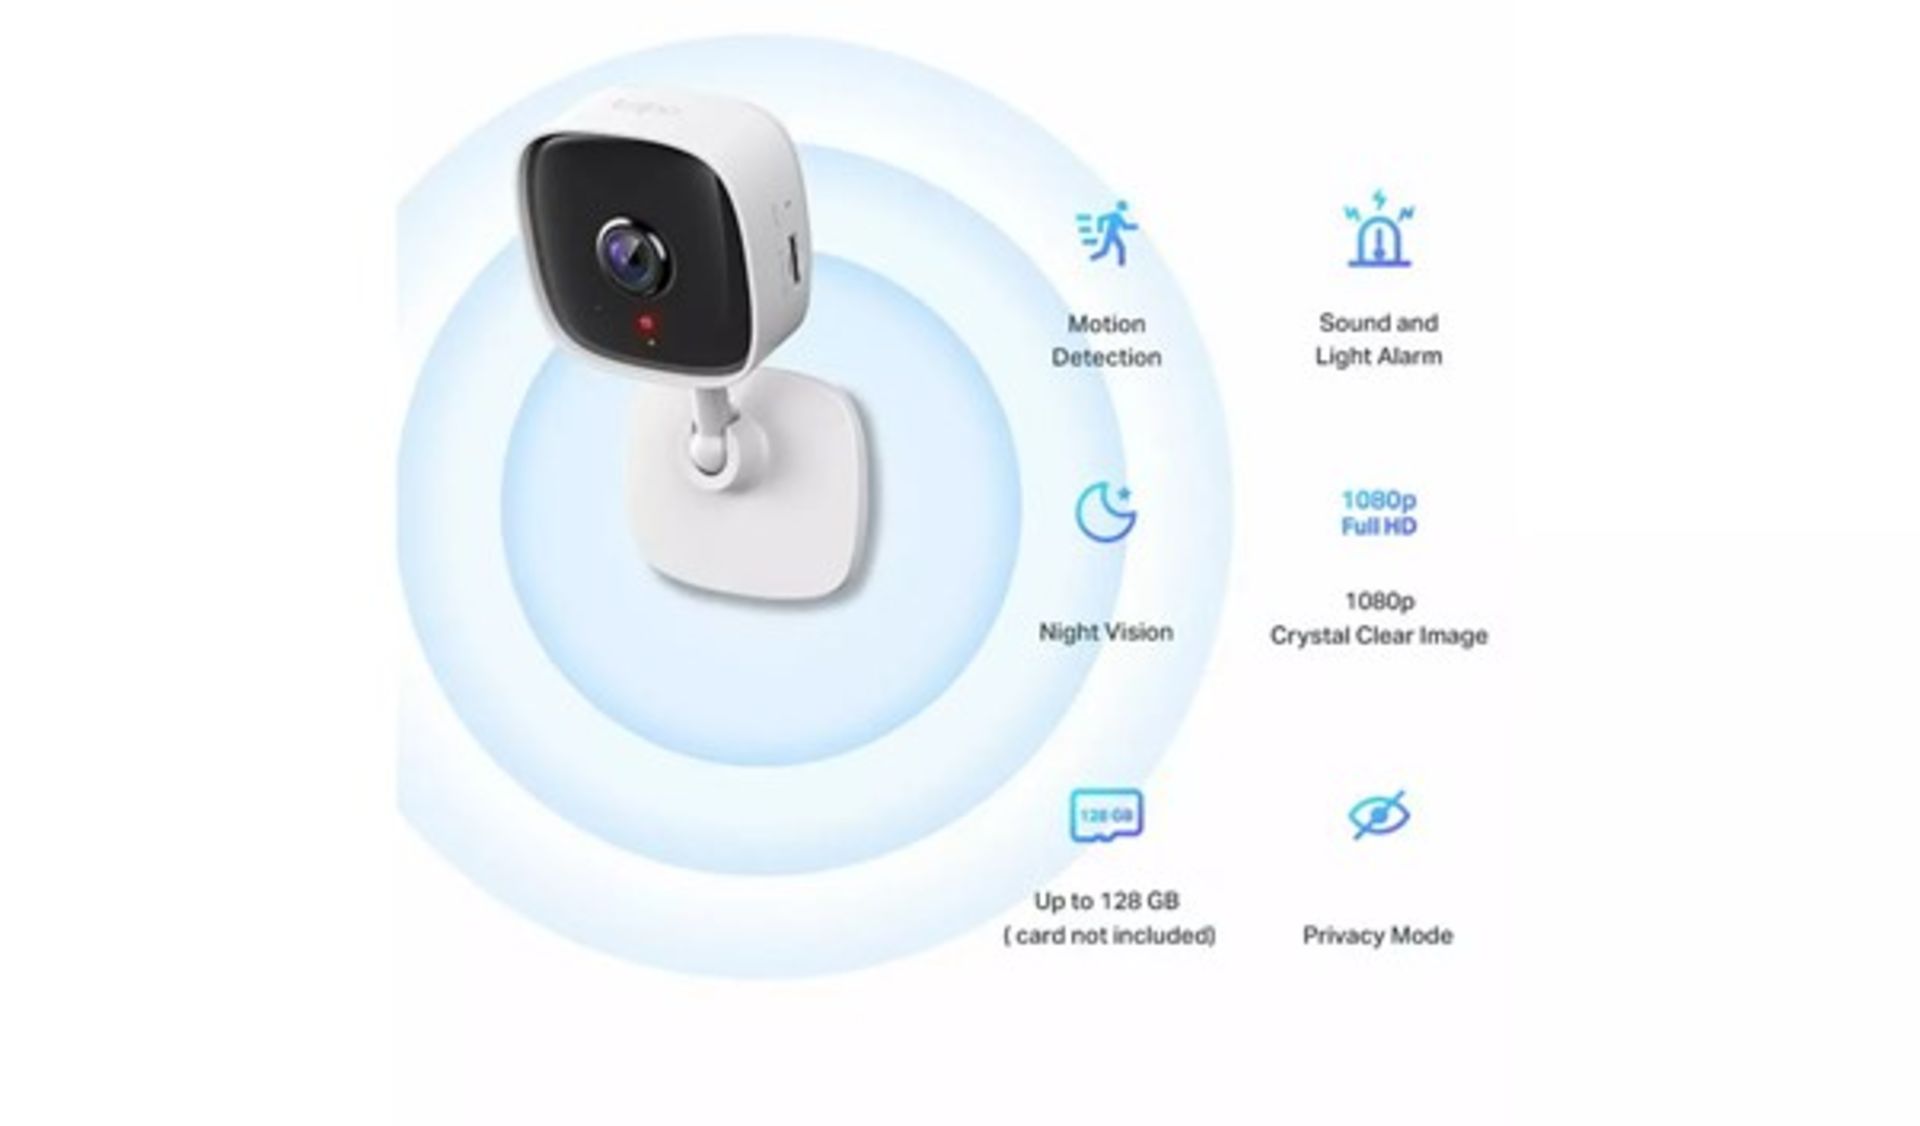 BRAND NEW AND UNUSED SMART 1080P WI-FI INDOOR CAMERA TP-LINK TAPO C100 *NO VAT* - Image 2 of 7